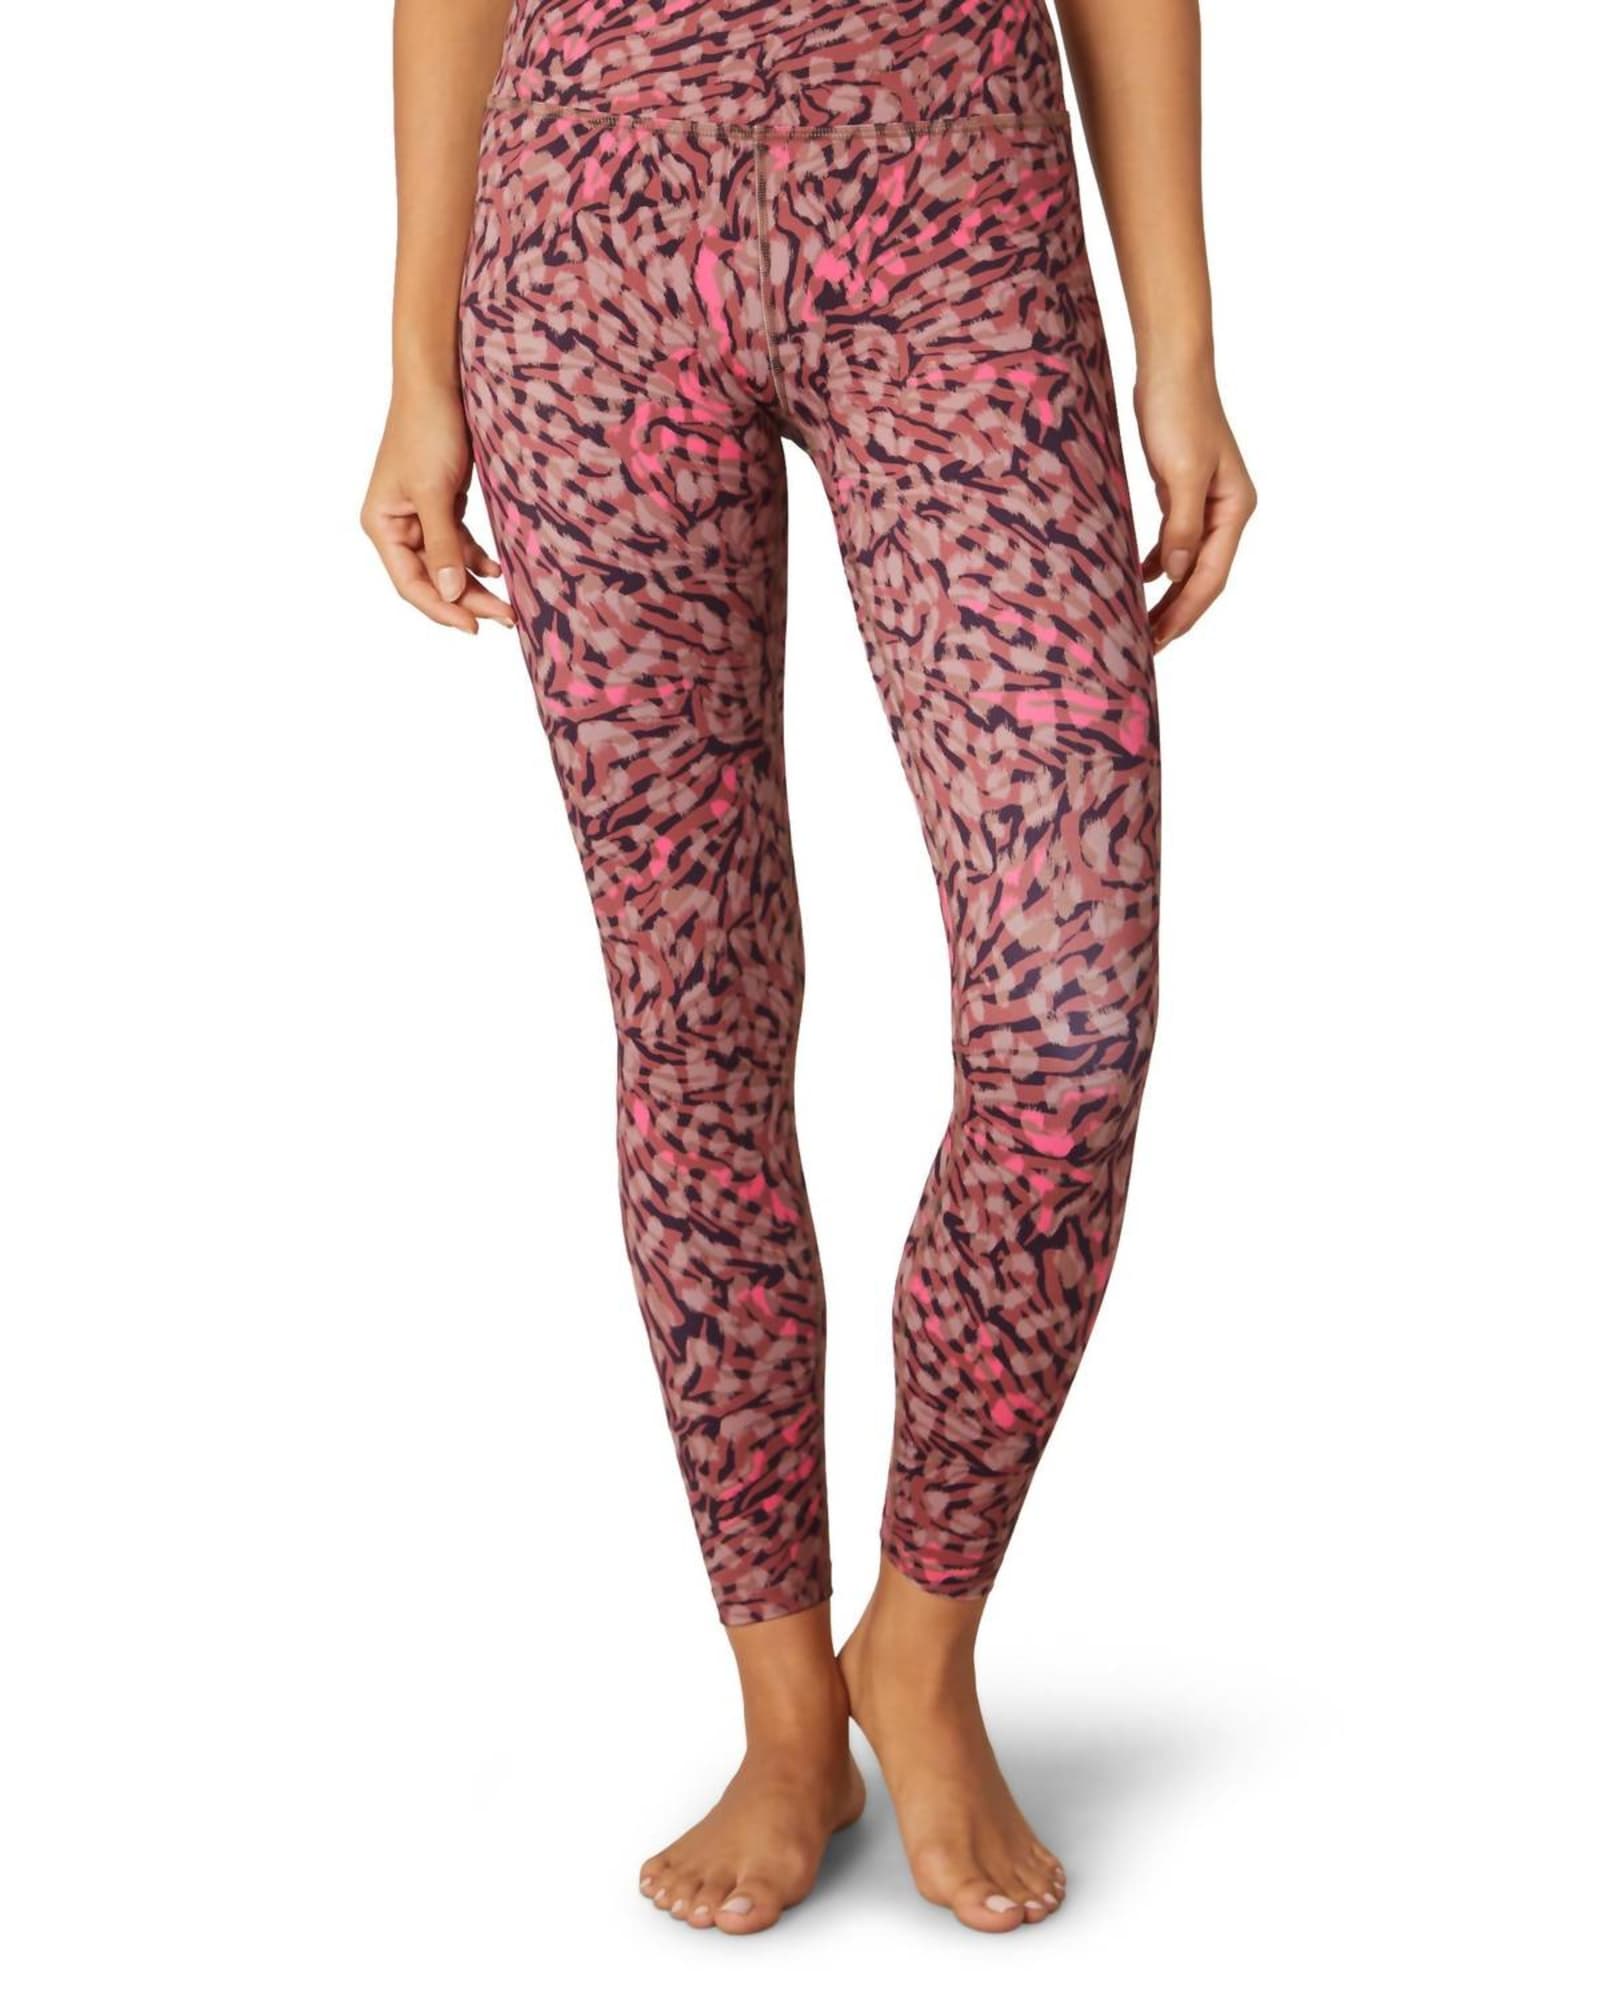 Lux High Waisted Midi Leggings in Electric Cheetah Swirl | Electric Cheetah Swirl